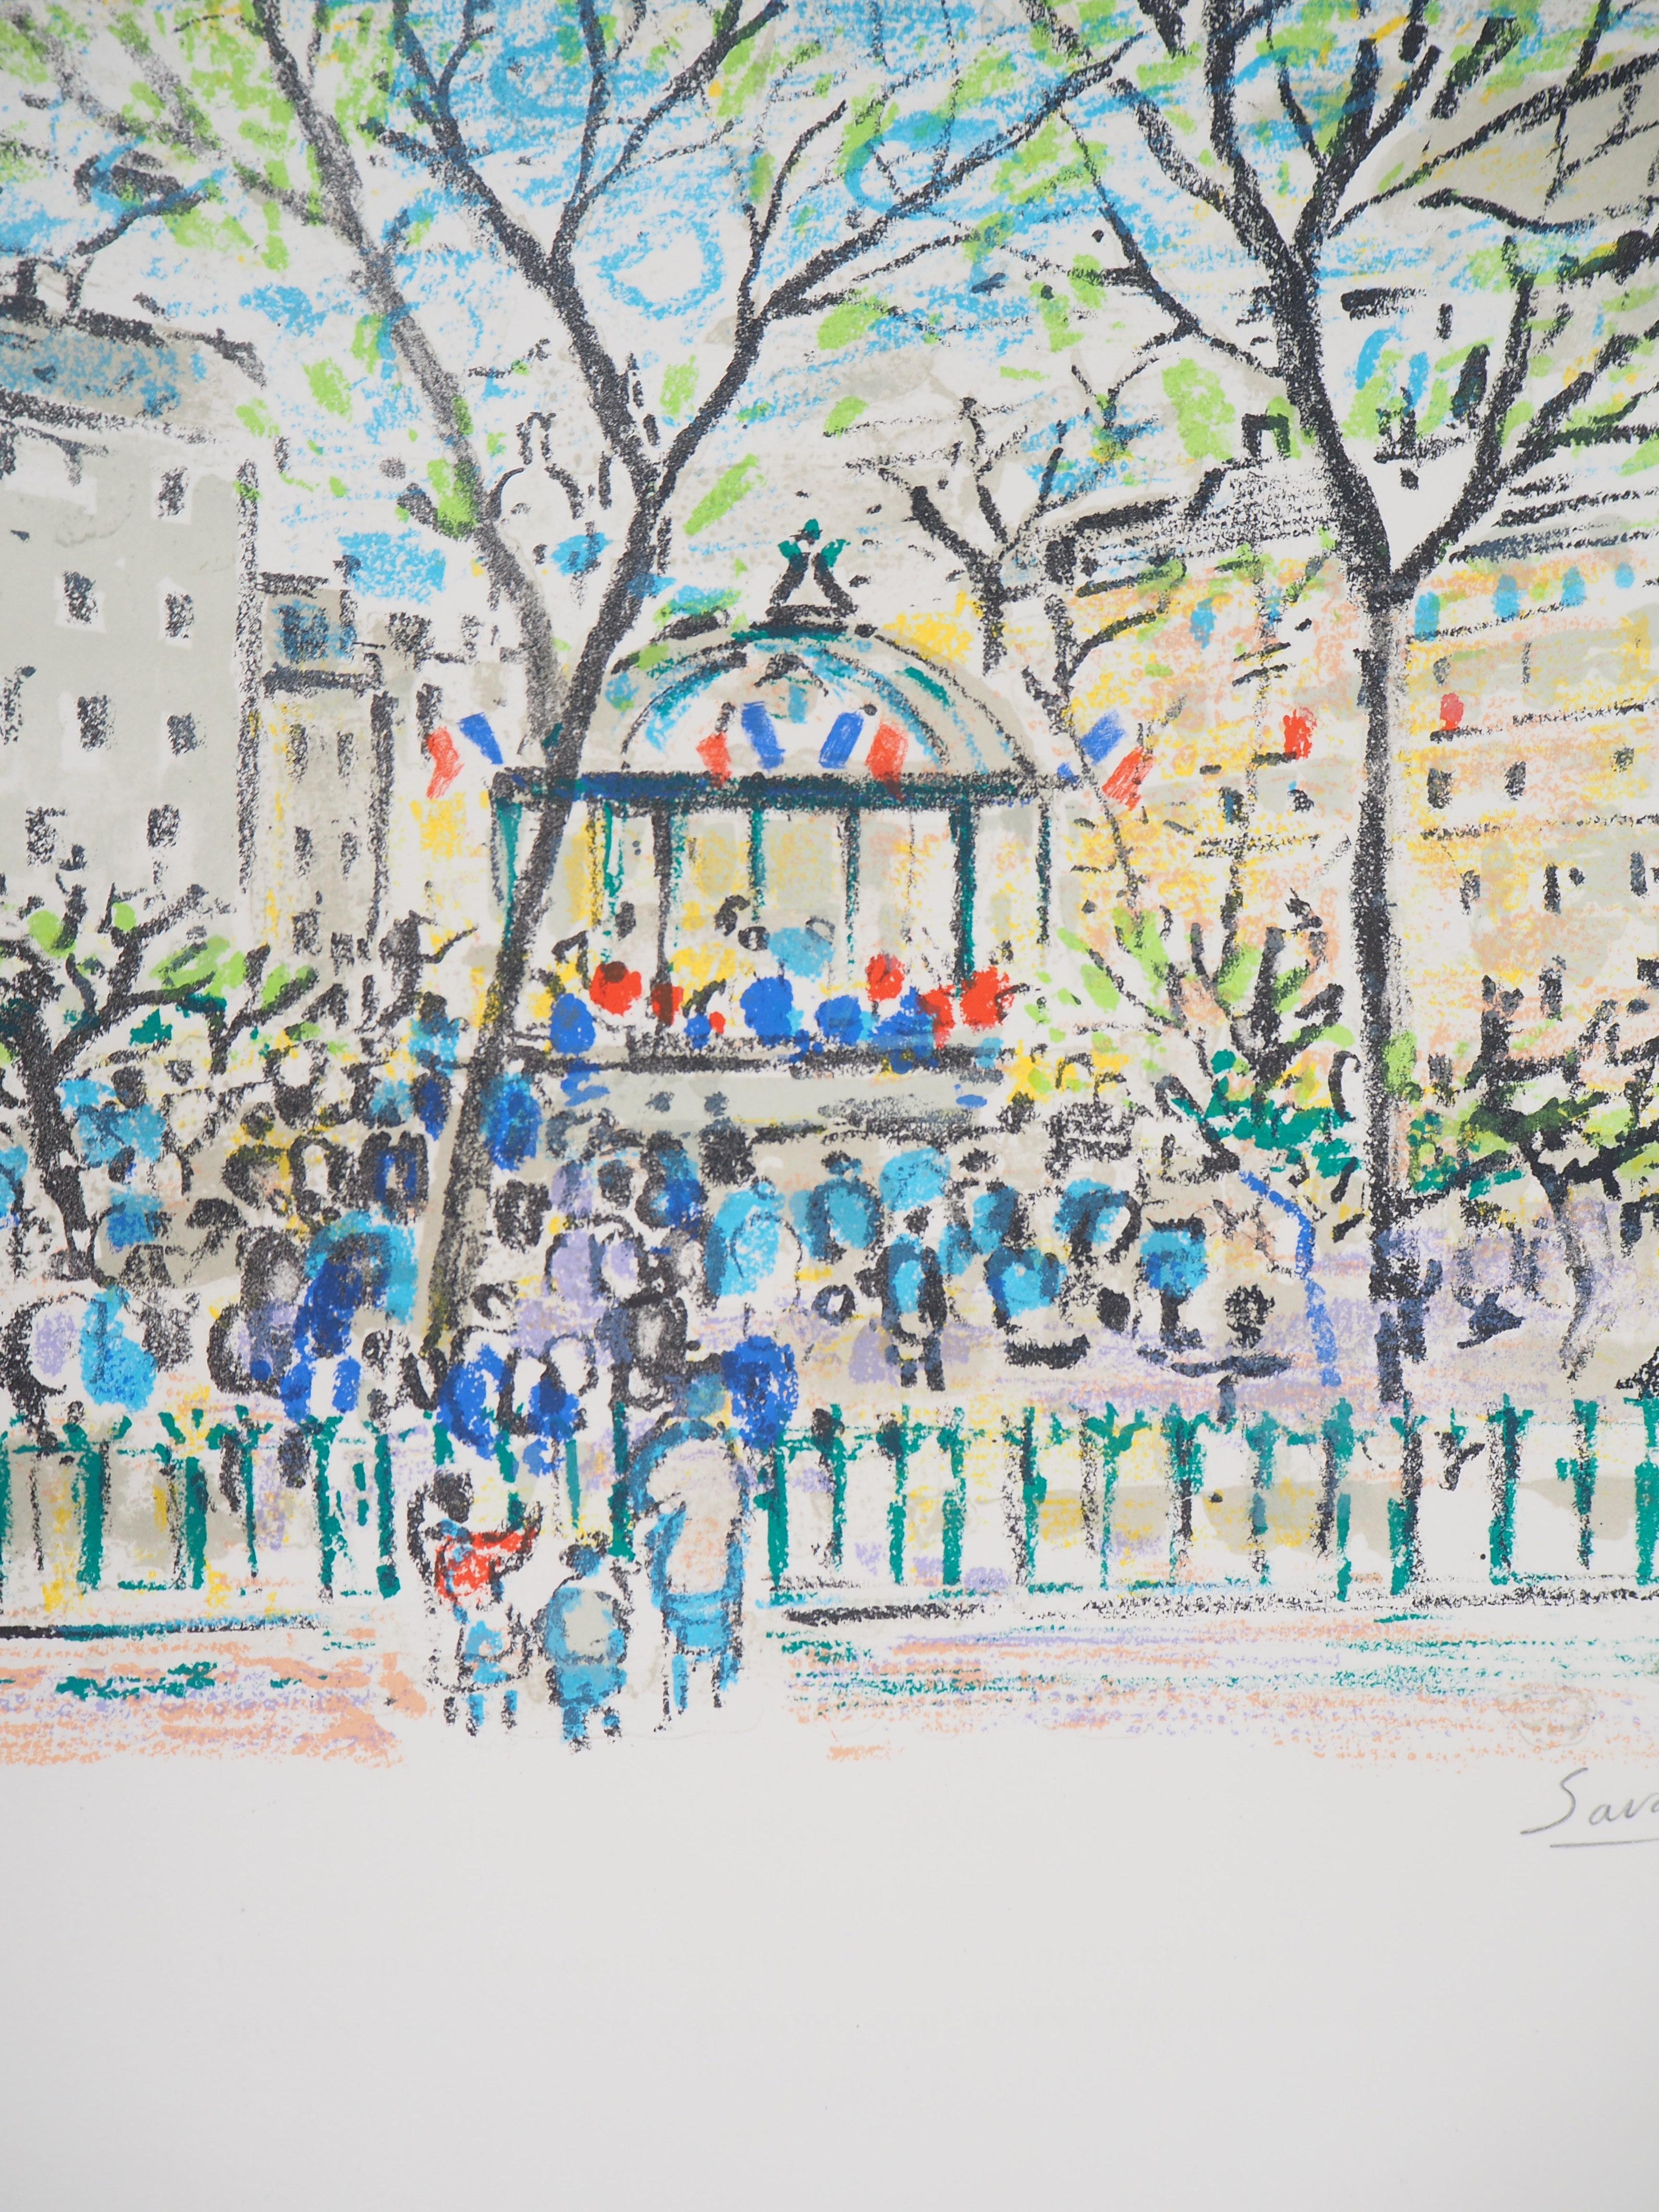 Robert SAVARY
Paris : Bandstand Near Nation Square, 1969

Original lithograph (Mourlot workshop)
Handsigned in pencil
On Arches vellum 37 x 29 cm (c. 16 x 12 in)

Excellent condition